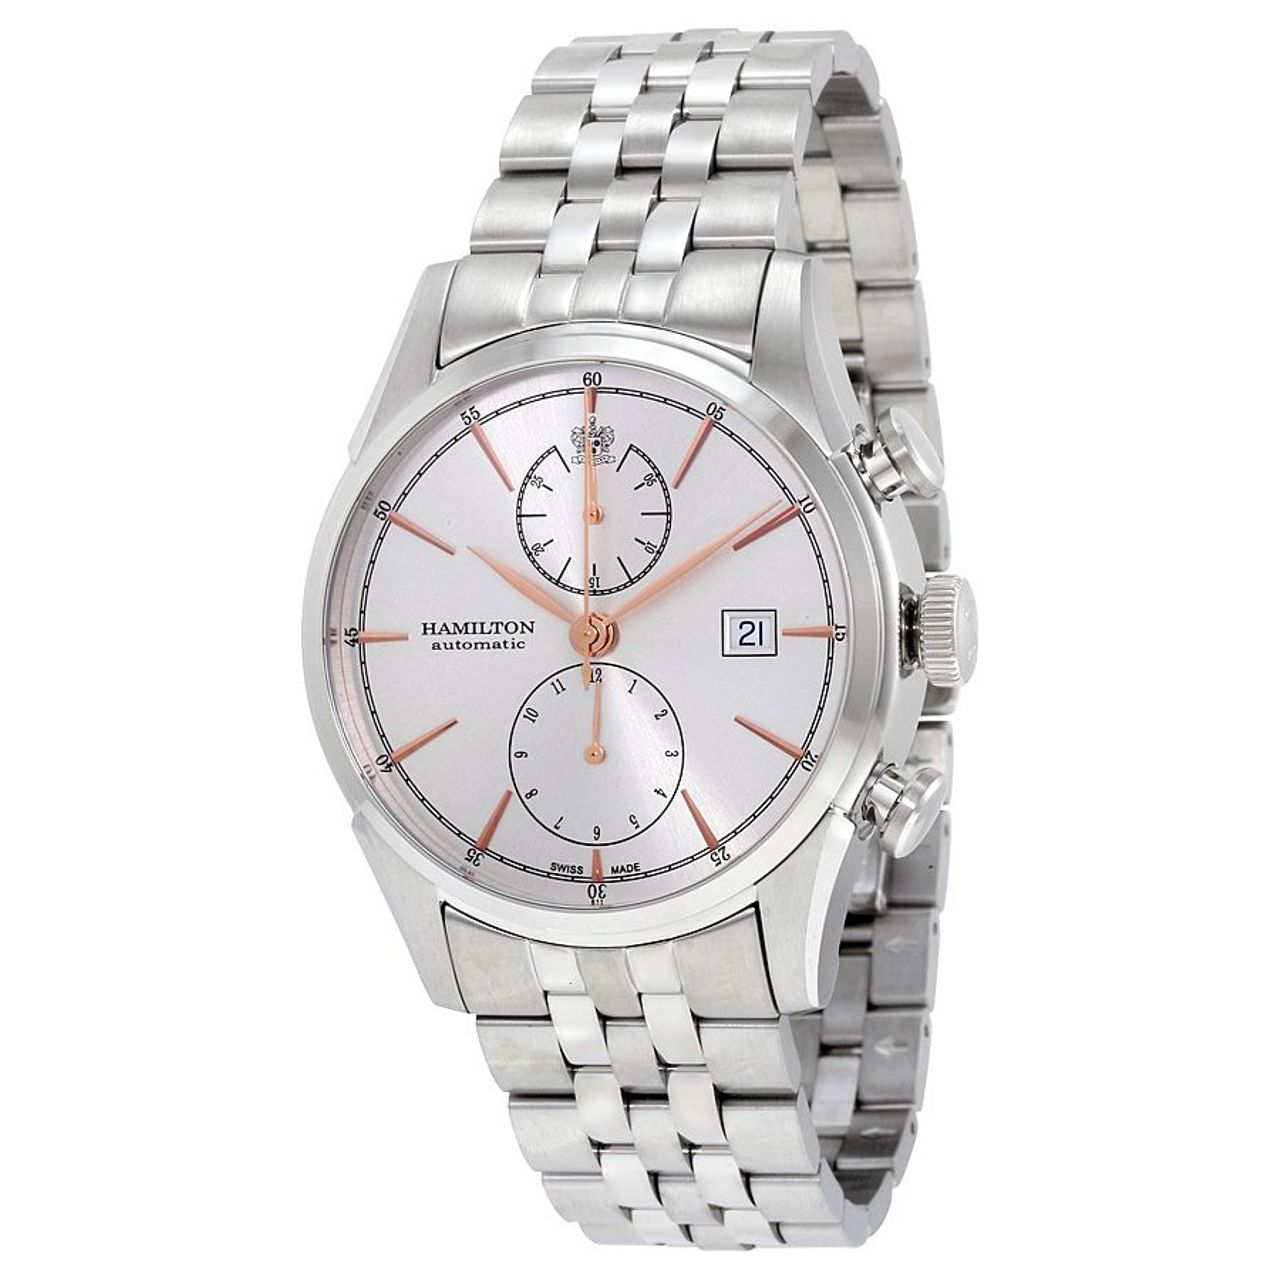 Hamilton H32416181 Mens Silver Dial Analog Automatic Watch